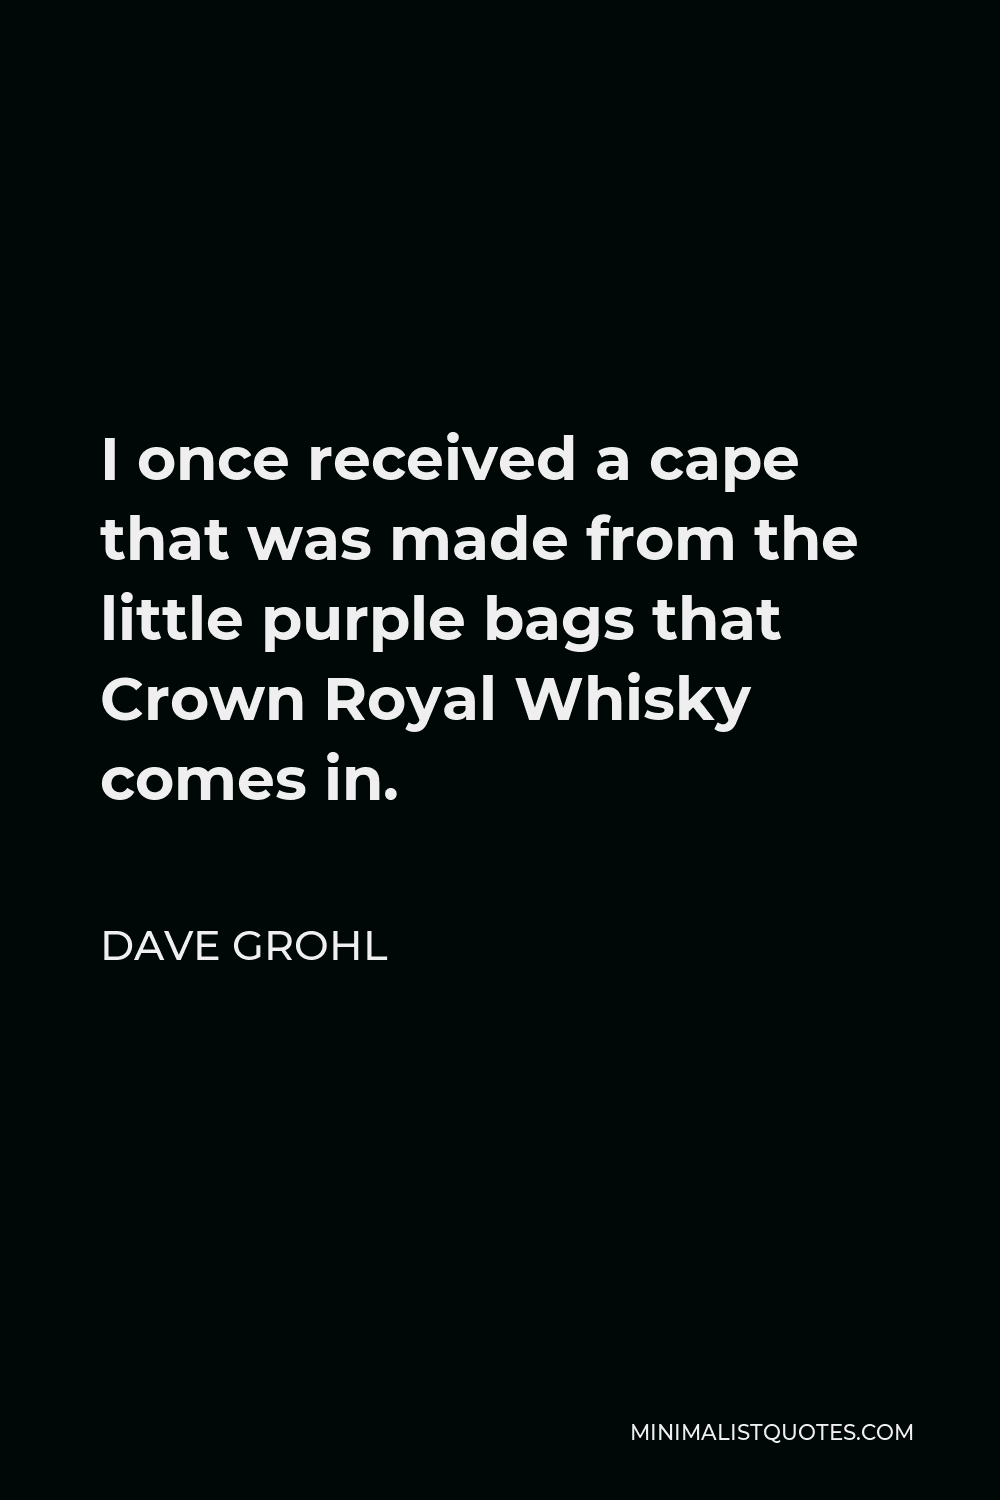 Dave Grohl Quote - I once received a cape that was made from the little purple bags that Crown Royal Whisky comes in.